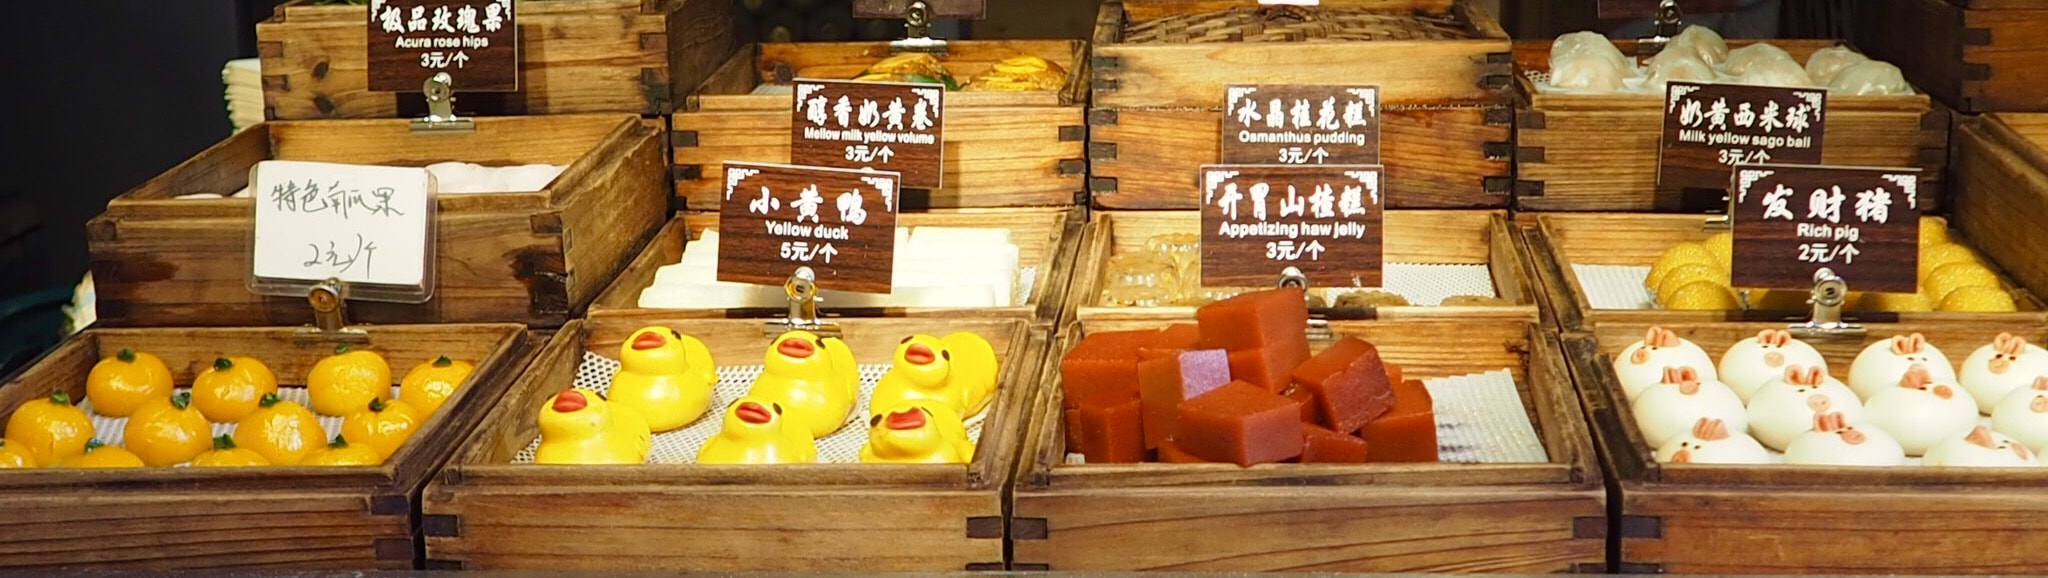 Olympus OM-D E-M10 sample photo. Yellow duck & rich pig - china photography